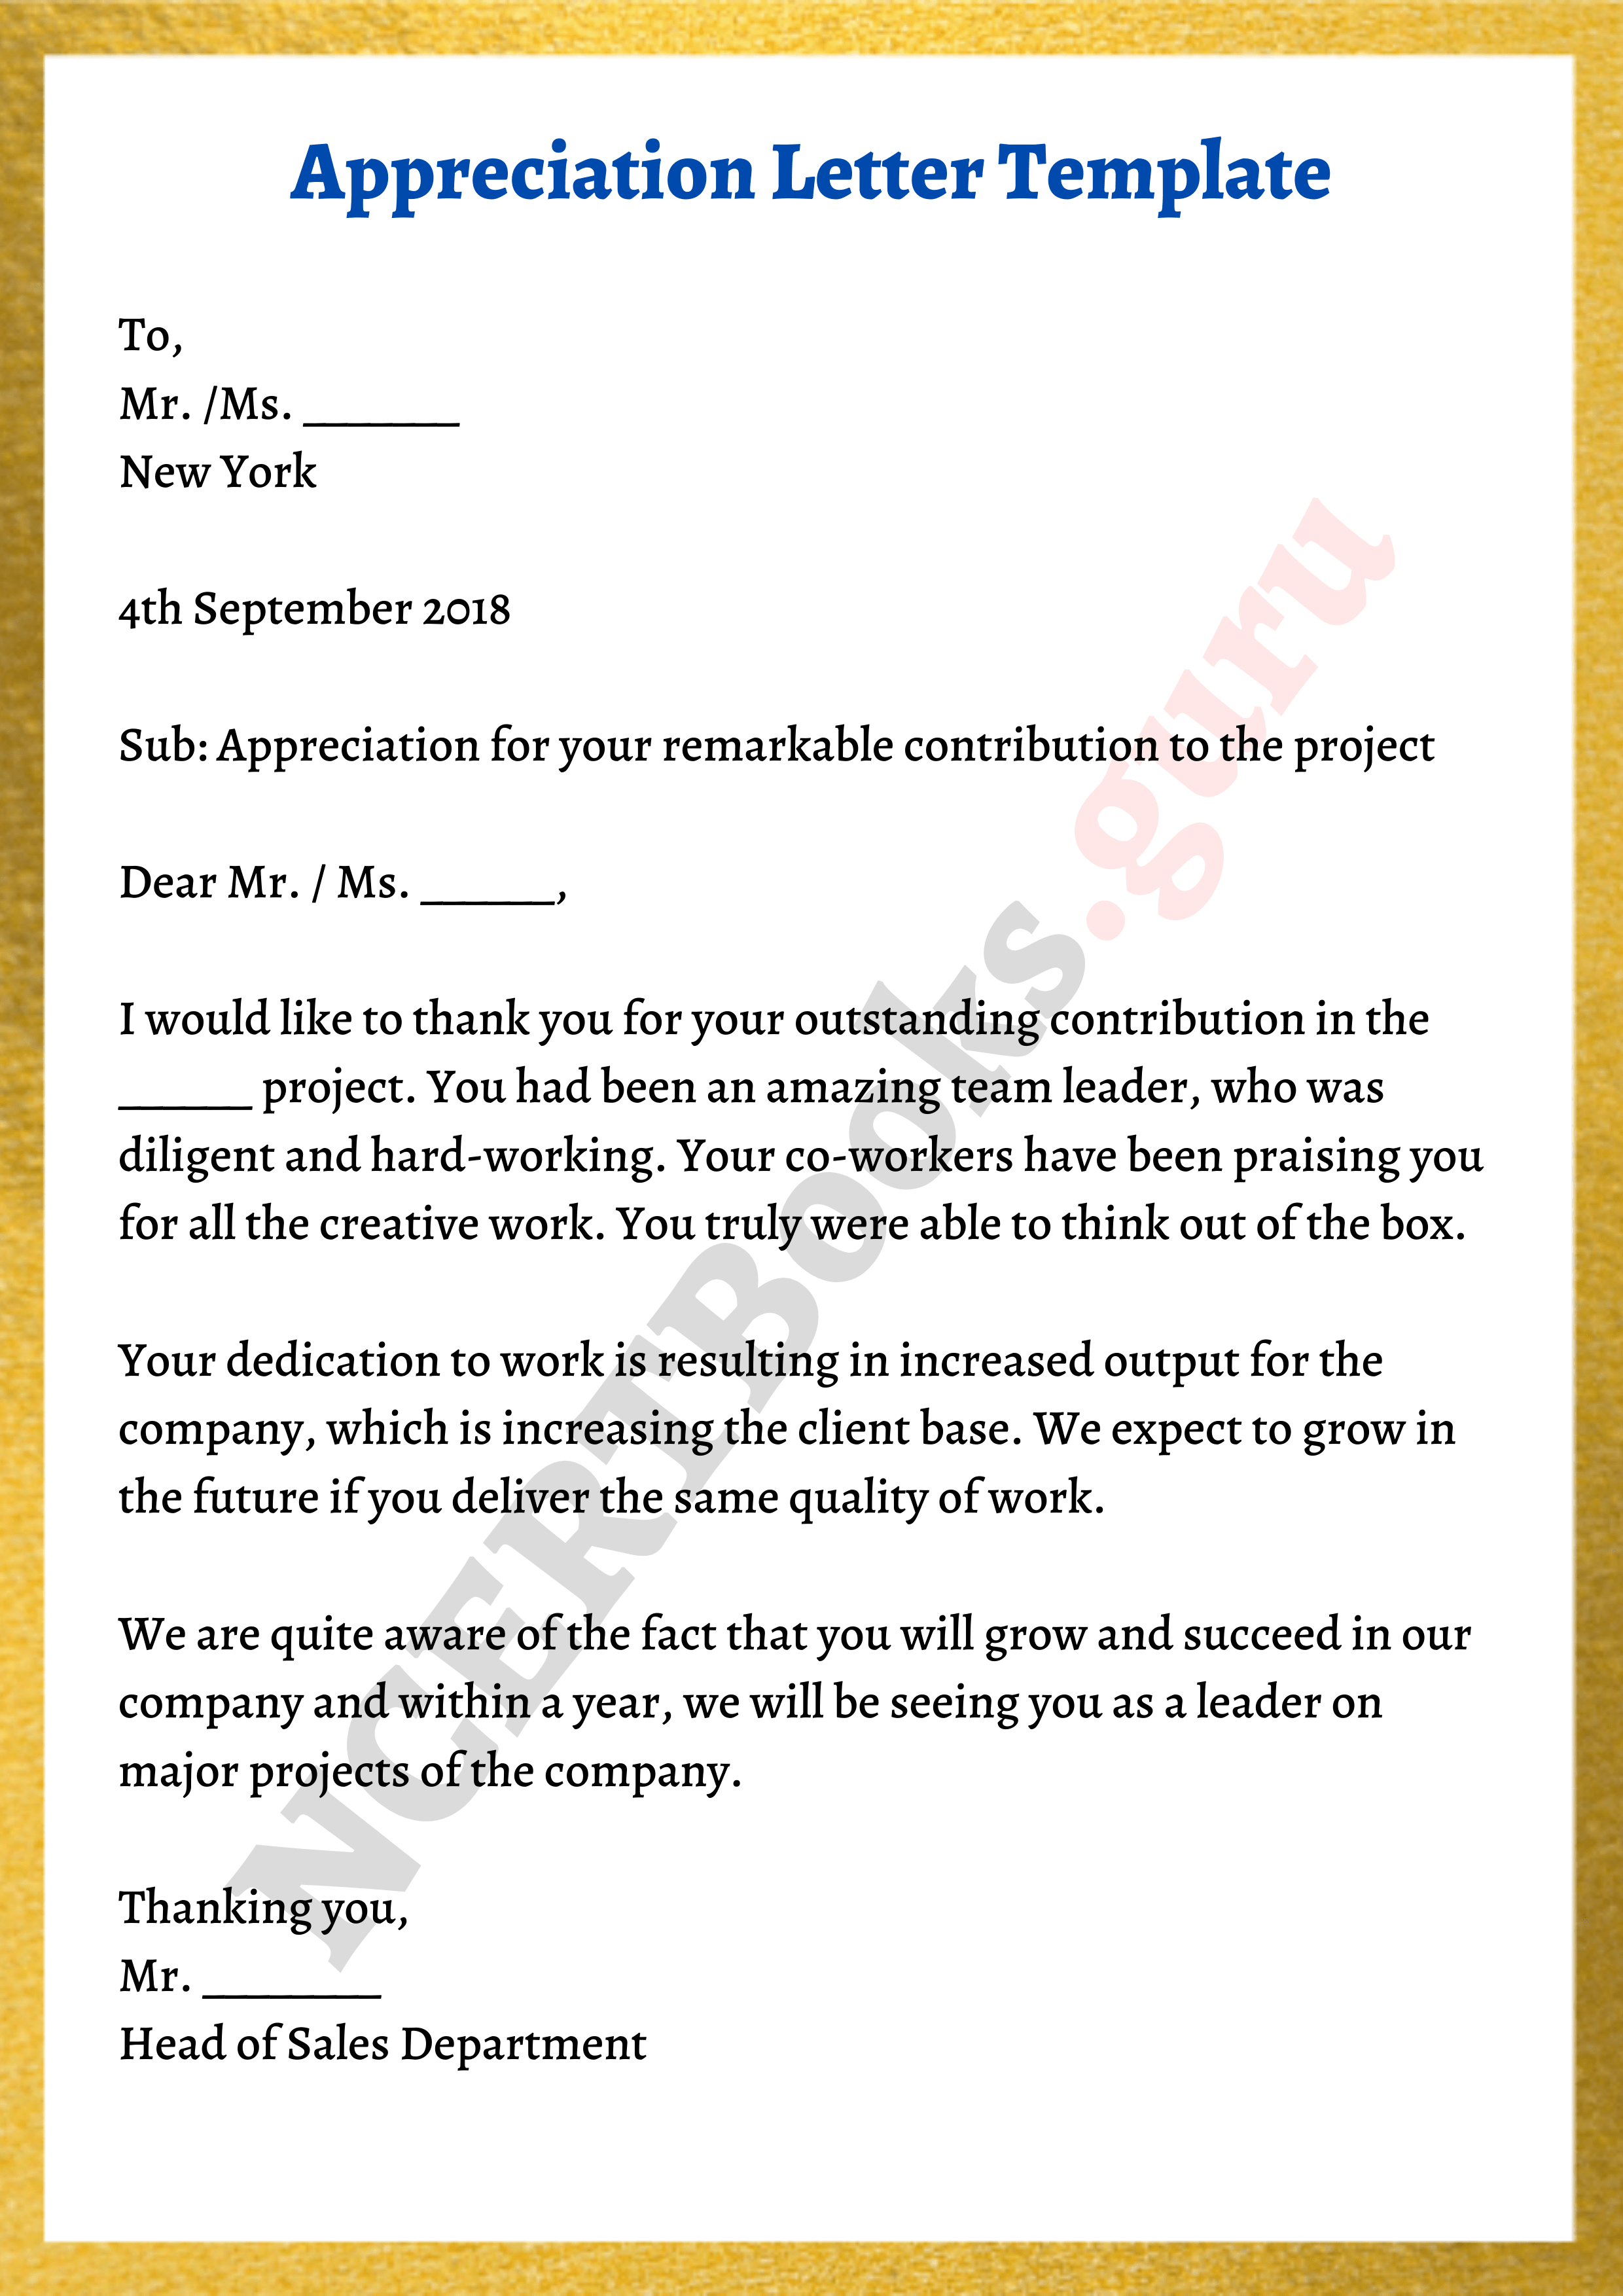 Appreciation Letter Format Template and Samples Steps to Write a Letter